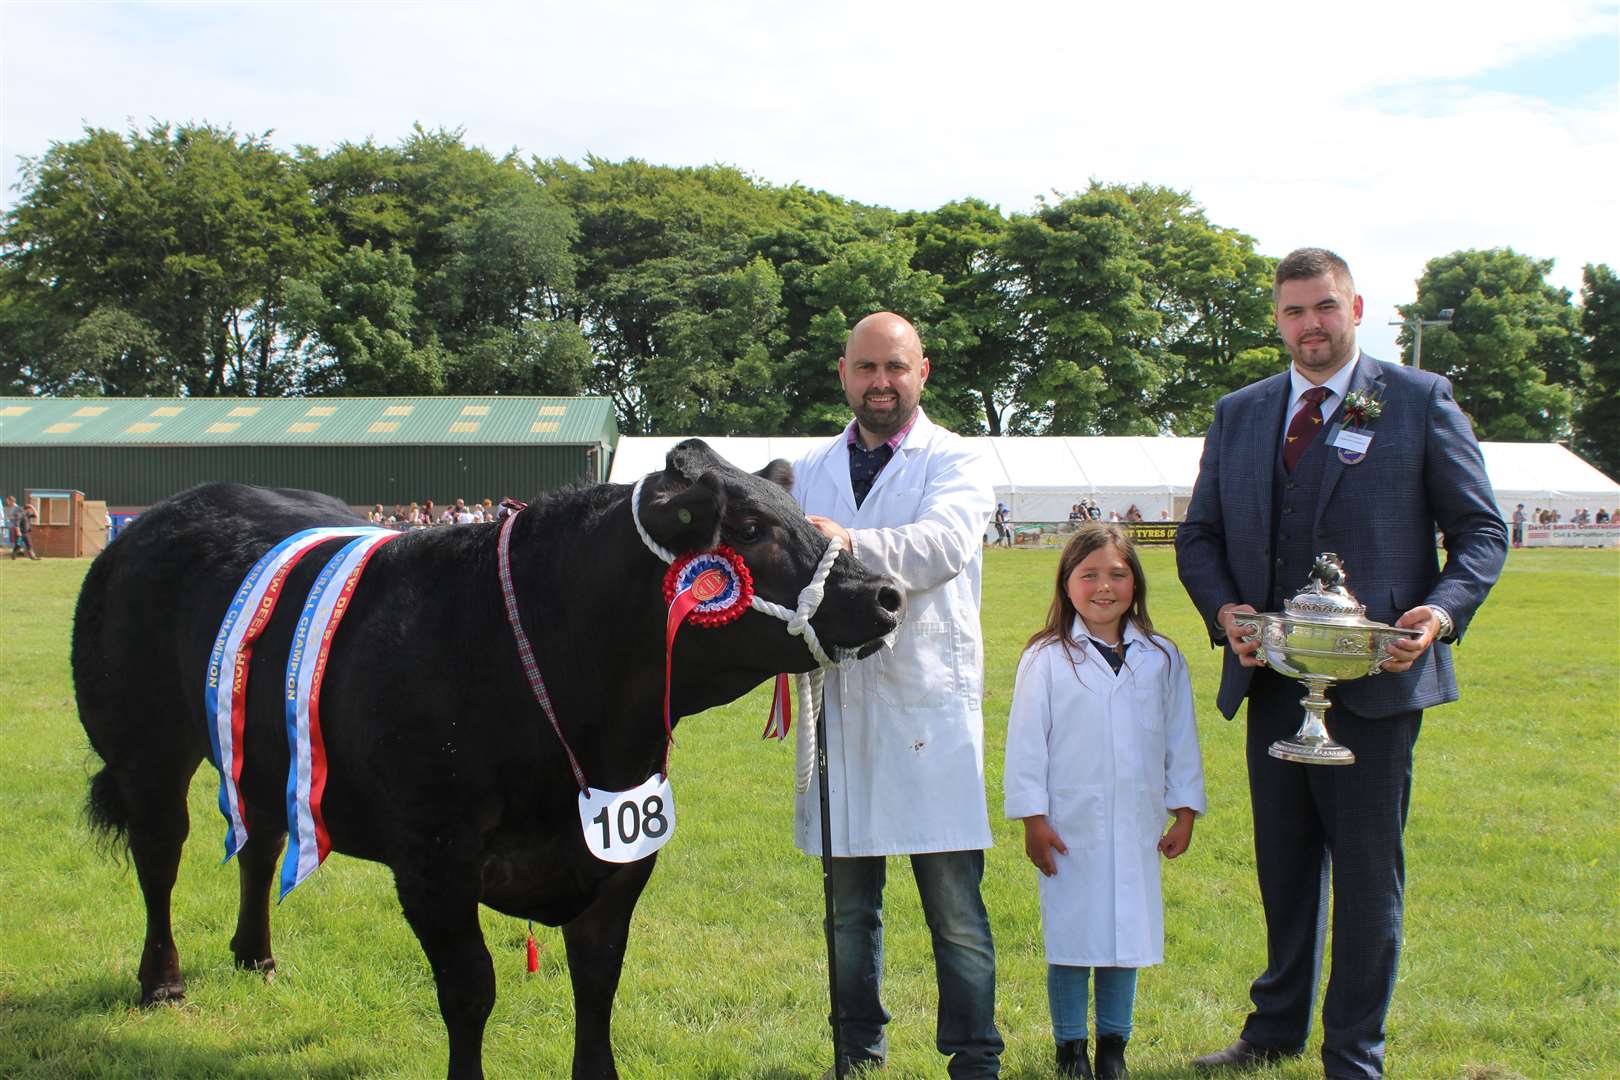 The Champion of Champions at New Deer Show a Limousin cross heifer handled by Steven and Lily Smith, with judge Gavin Ingram. Picture: Kyle Ritchie